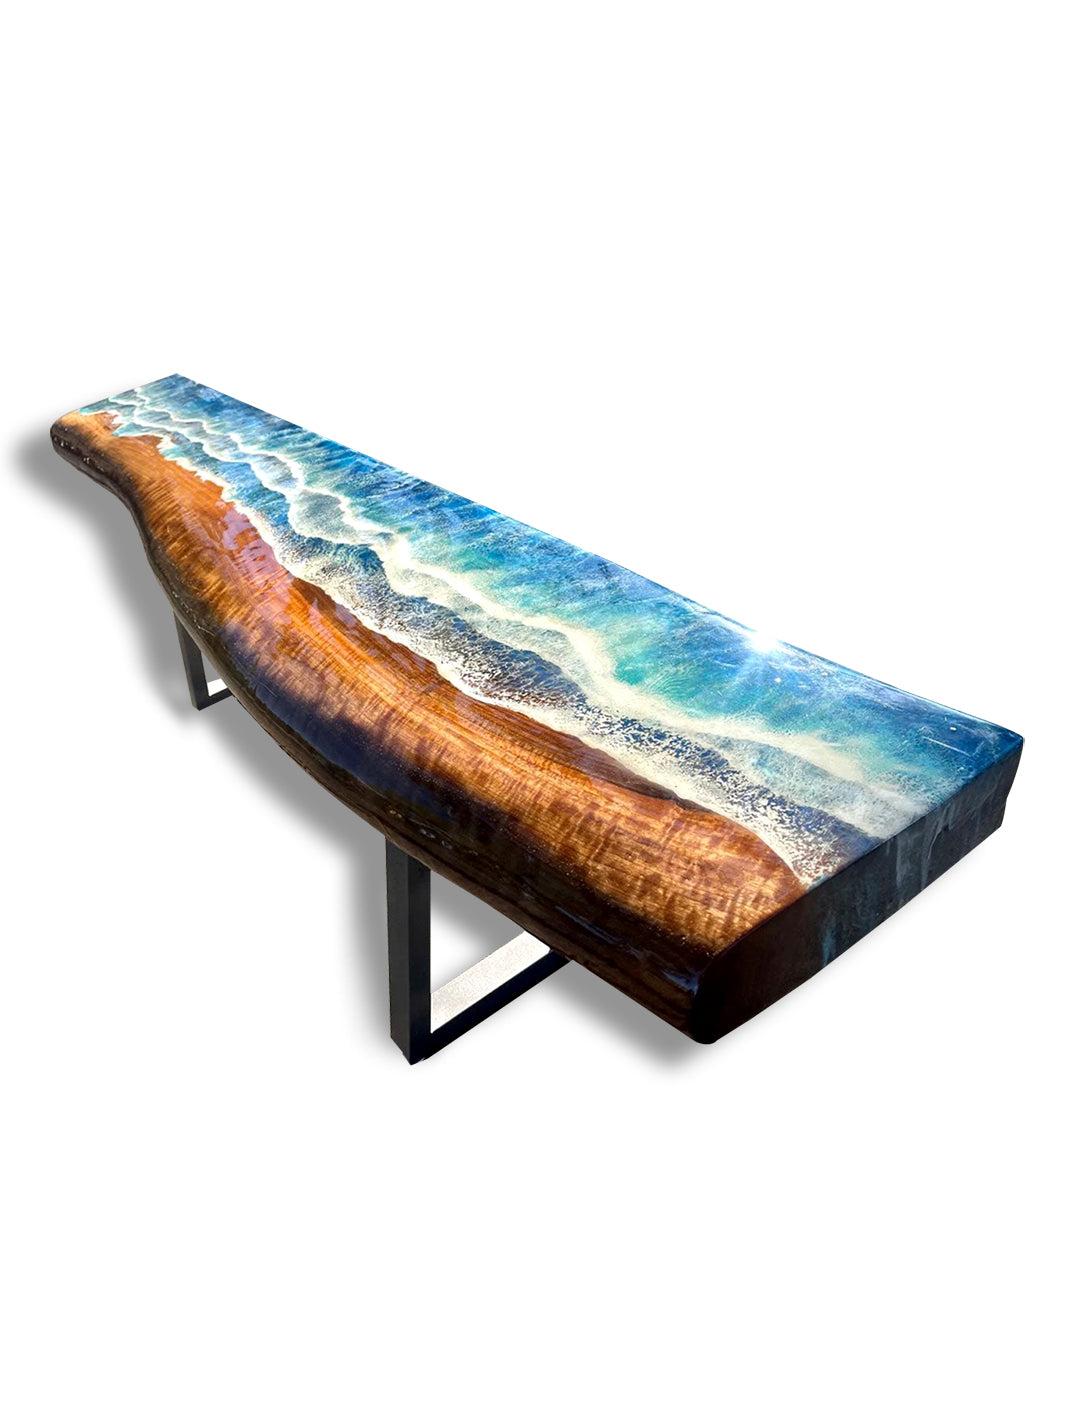 Handcrafted Walnut Ocean Themed Elongated Bench